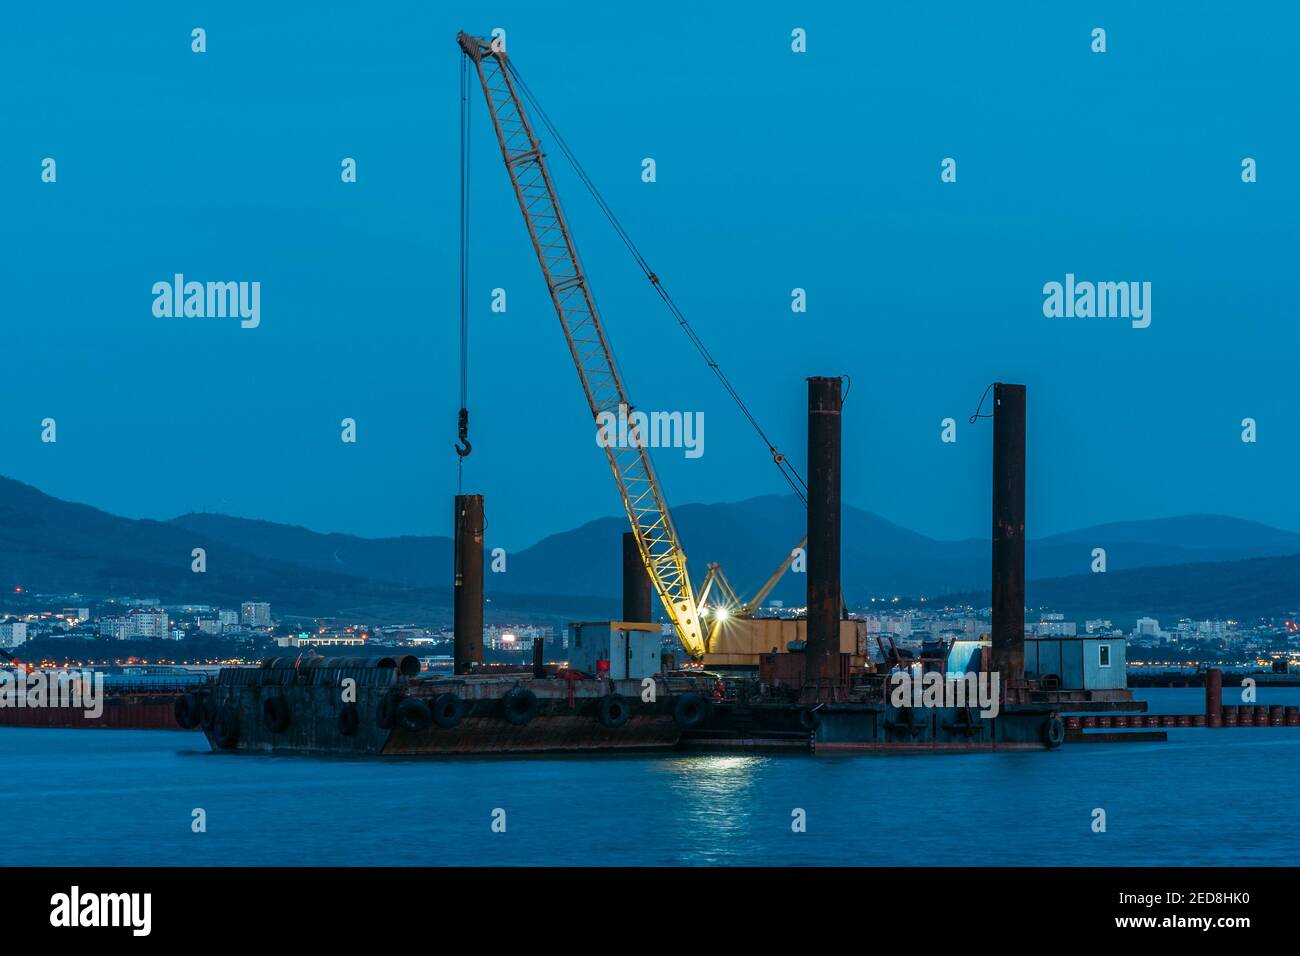 Cargo crane working in small port, construction of industrial harbor or dock in evening, sea goods transportation and logistic development concept. Stock Photo